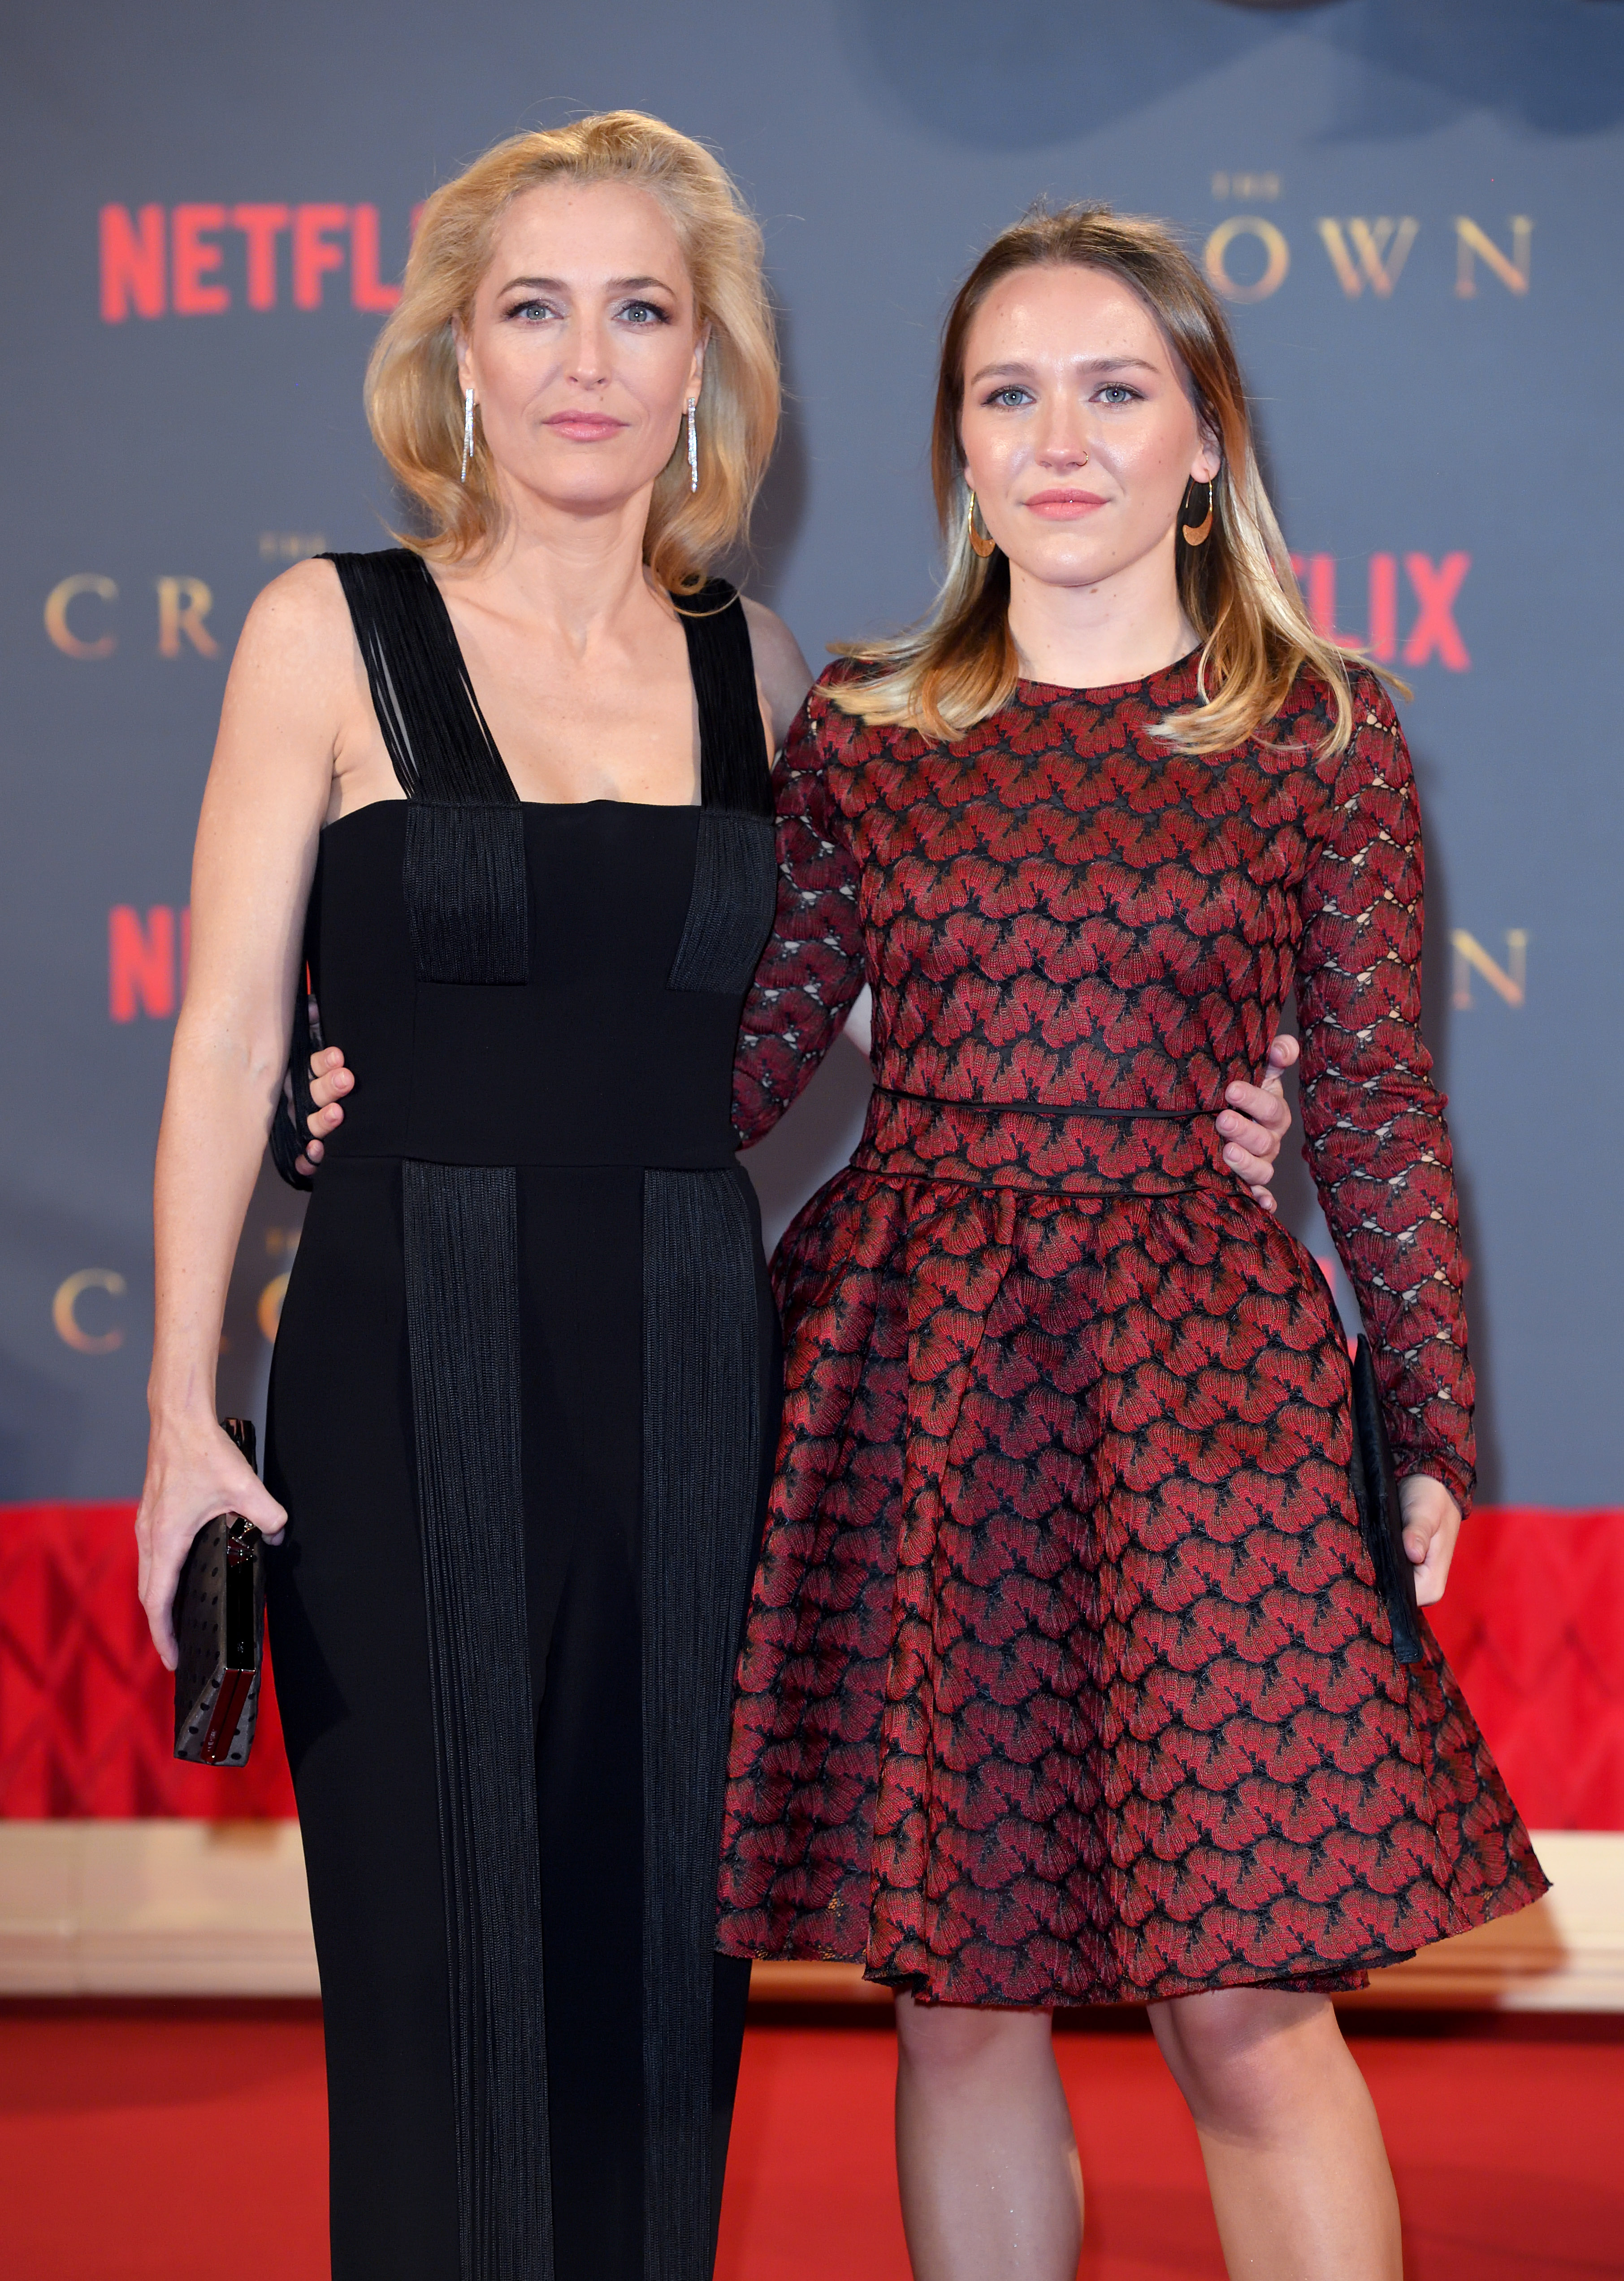 Gillian Anderson and daughter Piper Maru Klotz attend the World Premiere of Netflix's "The Crown" Season 2 at Odeon Leicester Square on November 21, 2017, in London, England. | Source: Getty Images